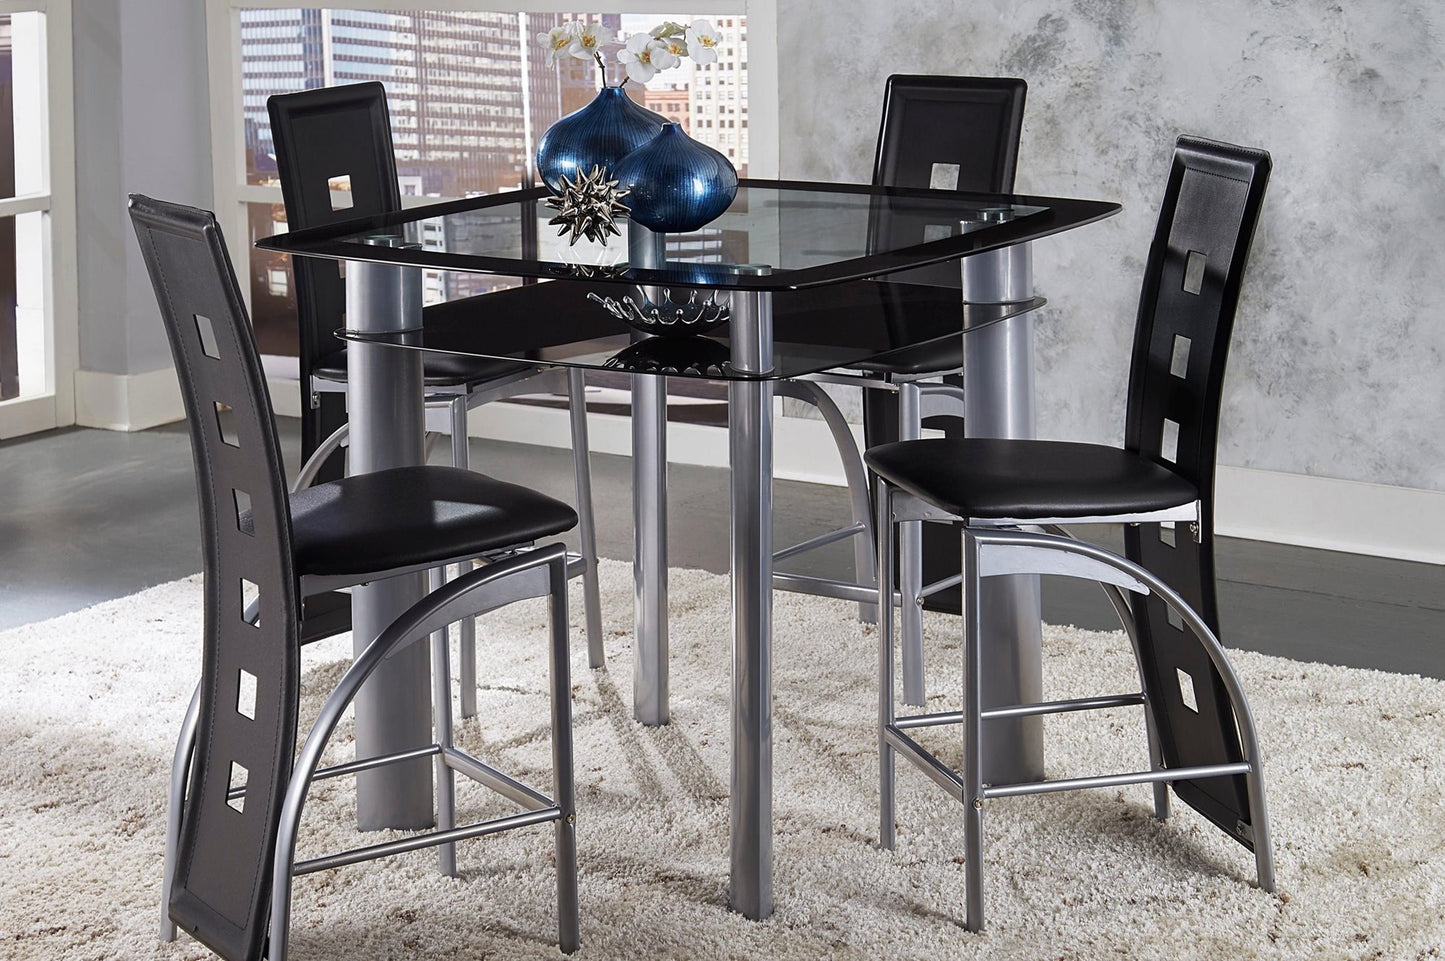 Homelegance Sona 5PC Counter Height Dining Set Table, 4 Chair in Black